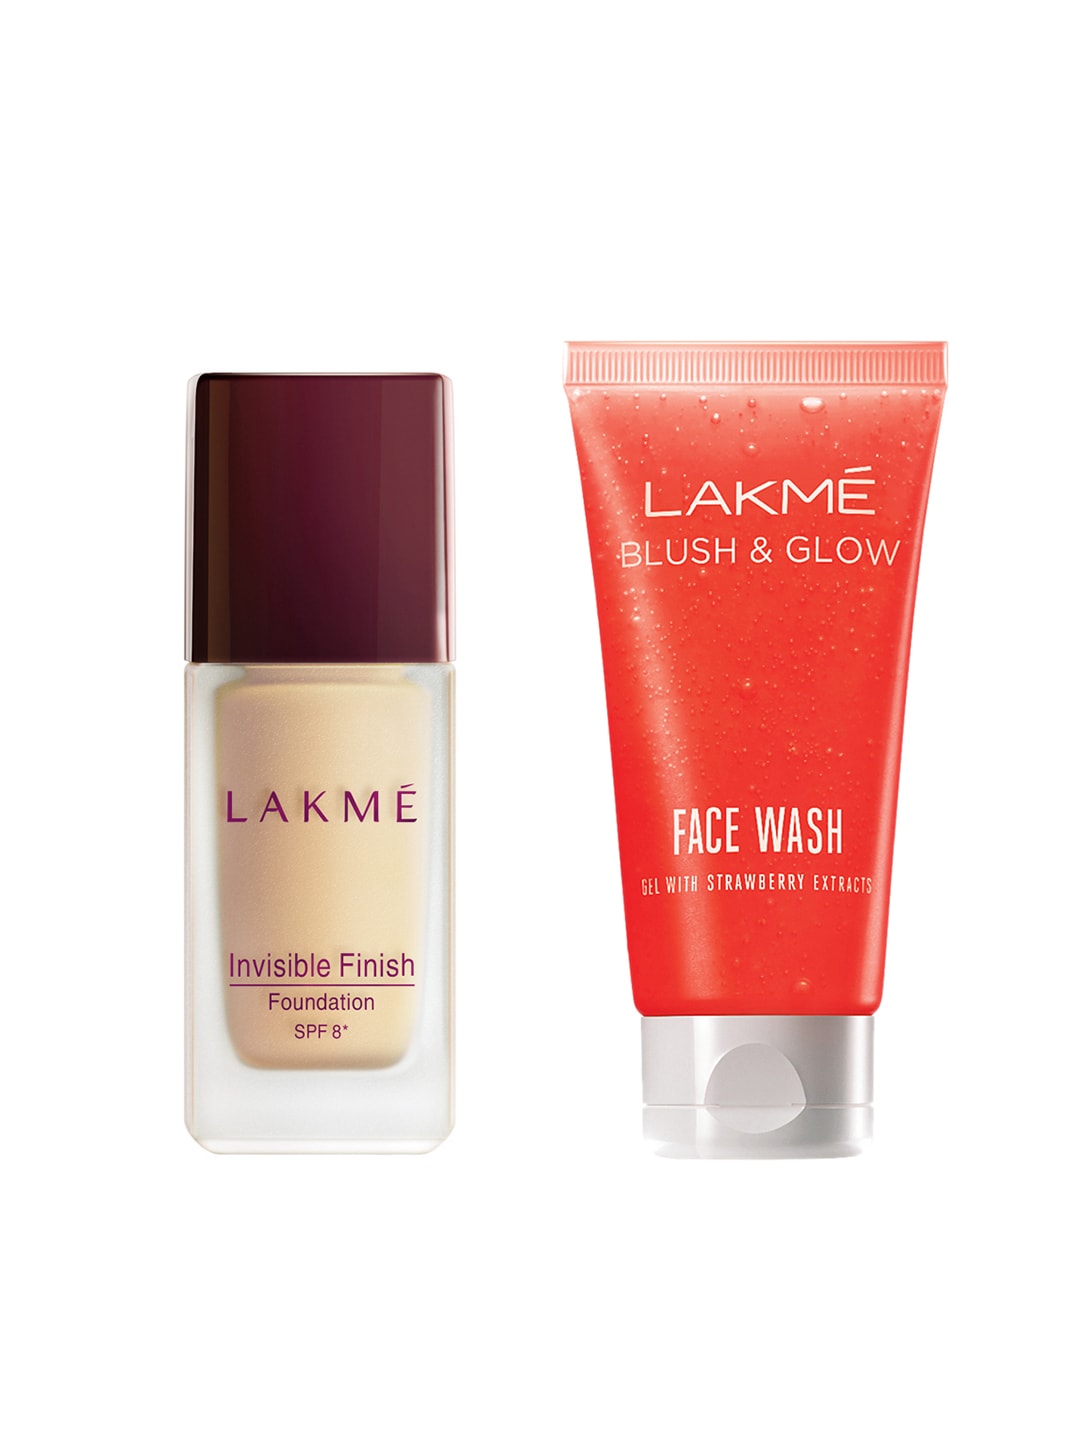 Lakme Set of Blush & Glow Strawberry Gel Face Wash & Invisible Finish Foundation Price in India